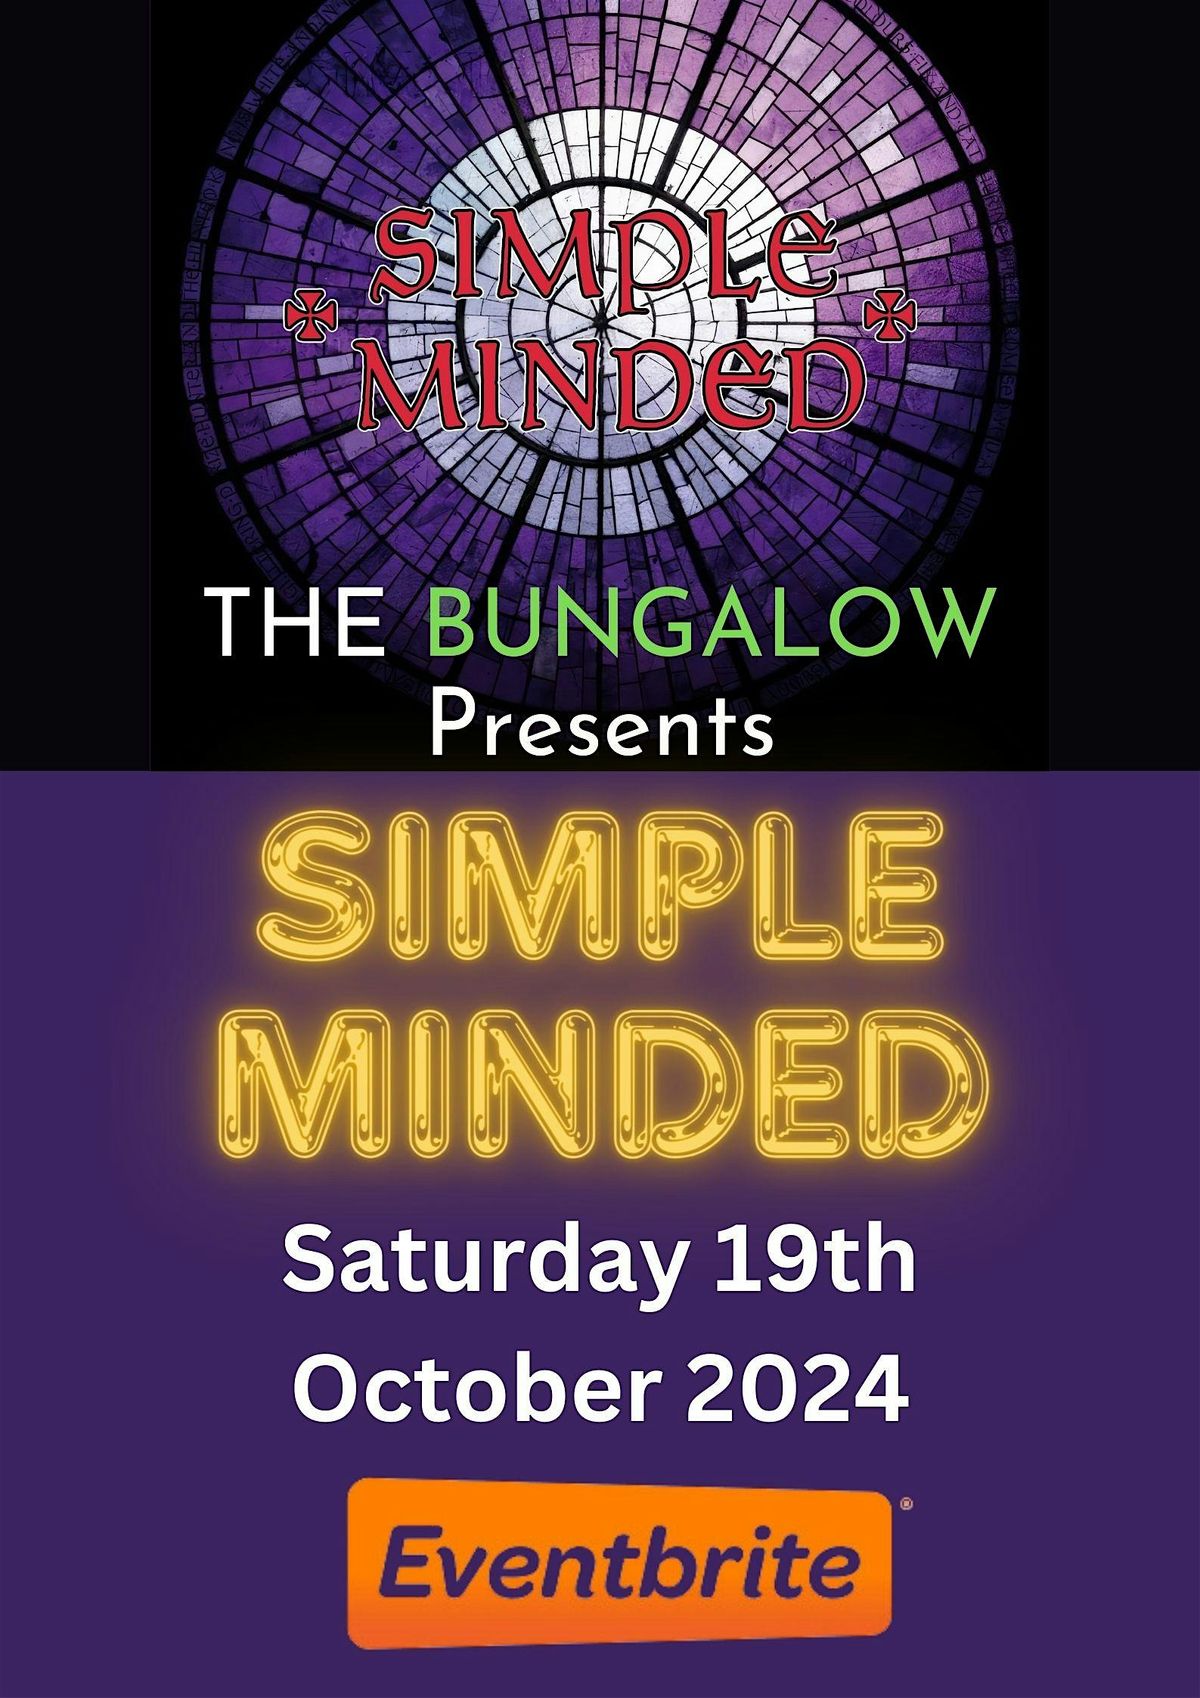 SIMPLE MINDED Tribute to Simple Minds